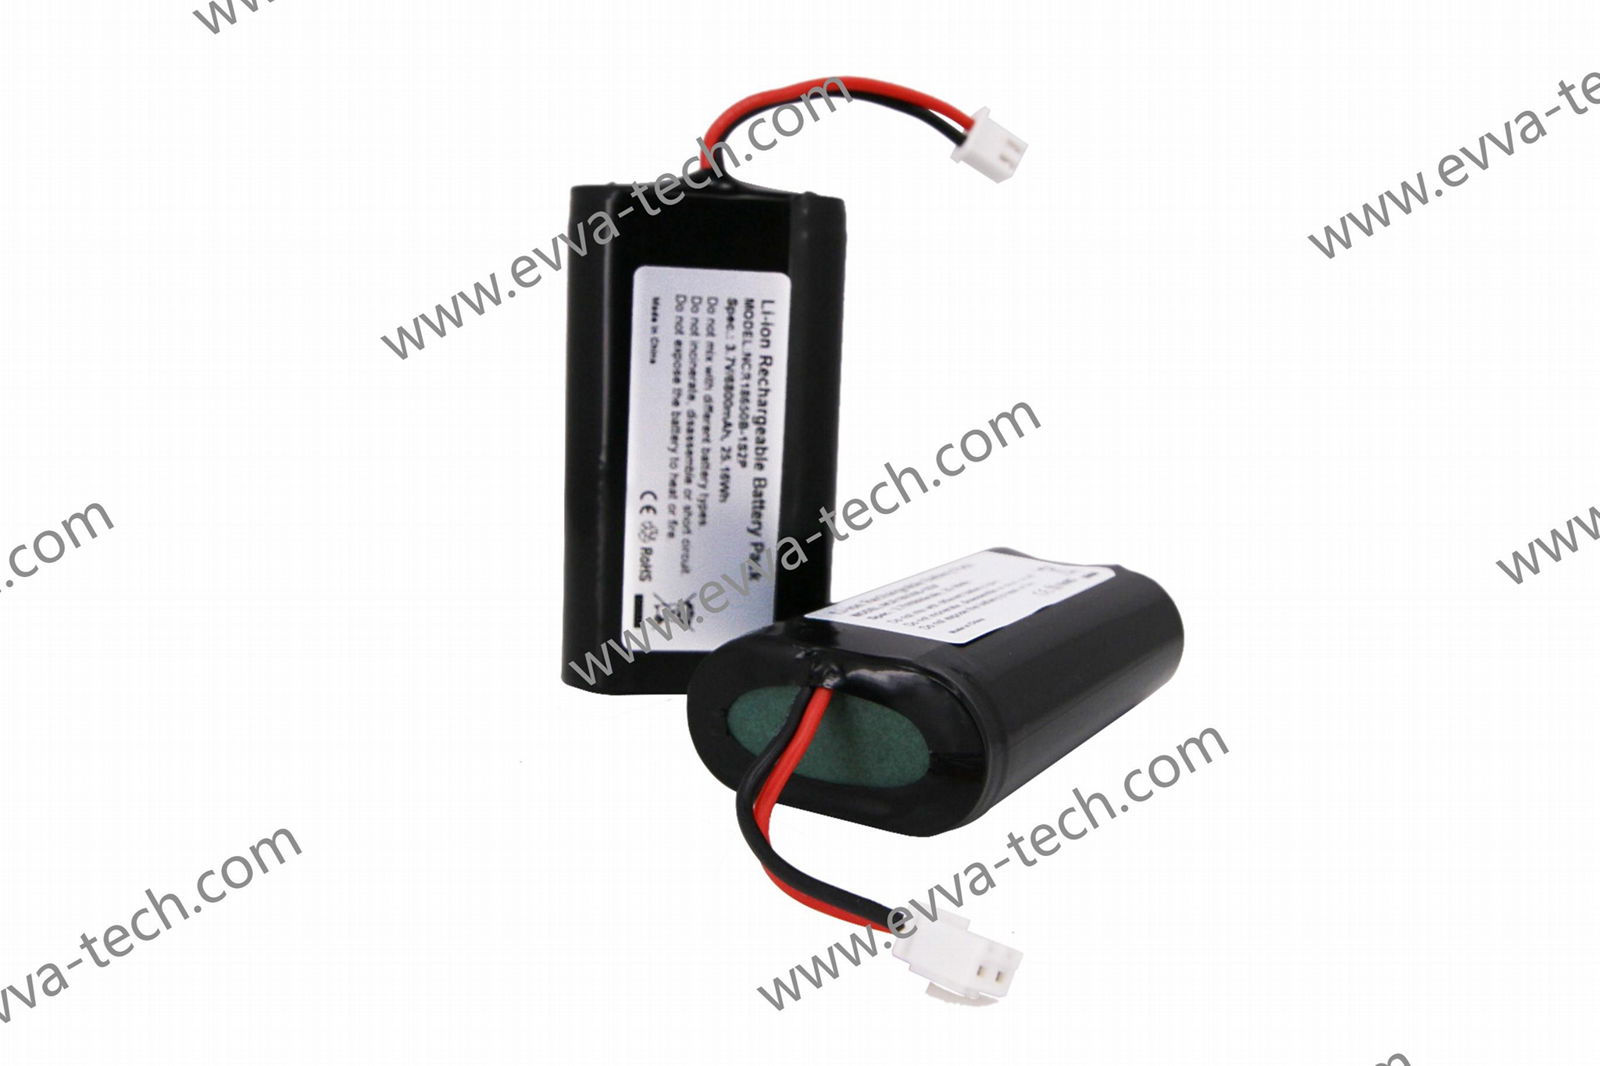 1S2P OEM 18650 21700 26650 3.7V LiFePO4 Lithium-Ion Battery with Heating Element